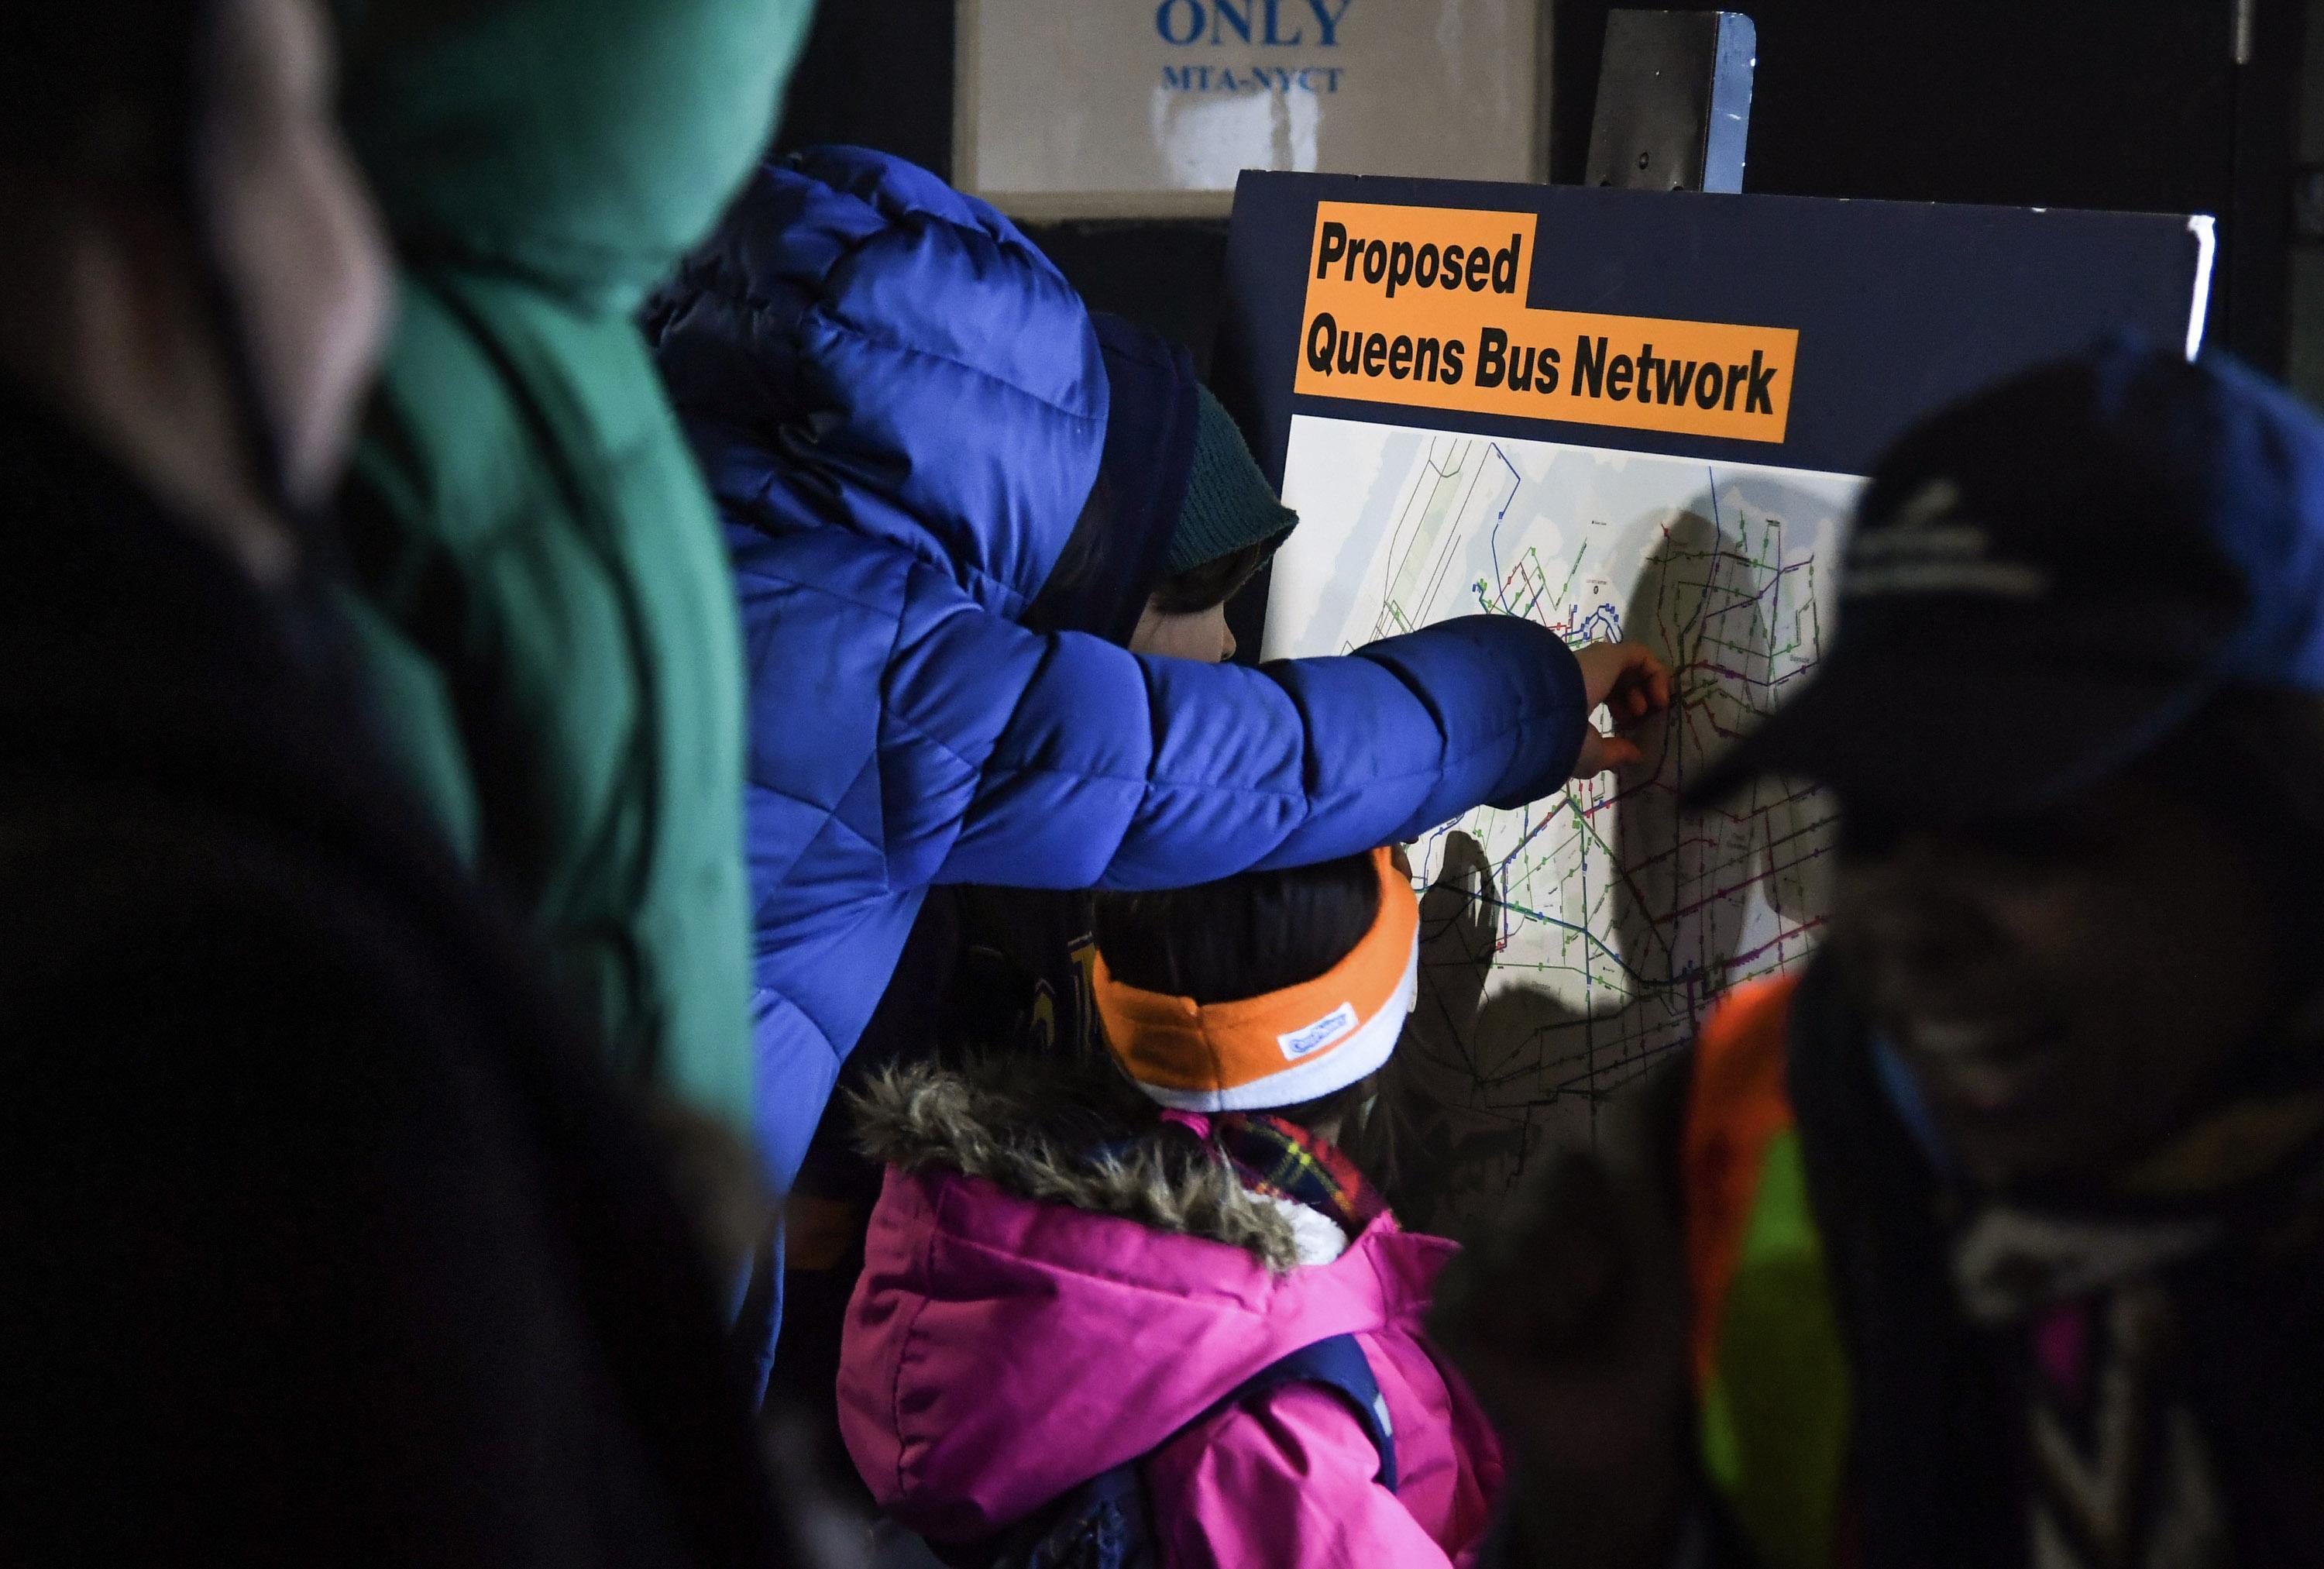 A small crowd of people gather around a large poster that reads, "Proposed Queens Bus Network." A small child is reaching out to touch the poster.